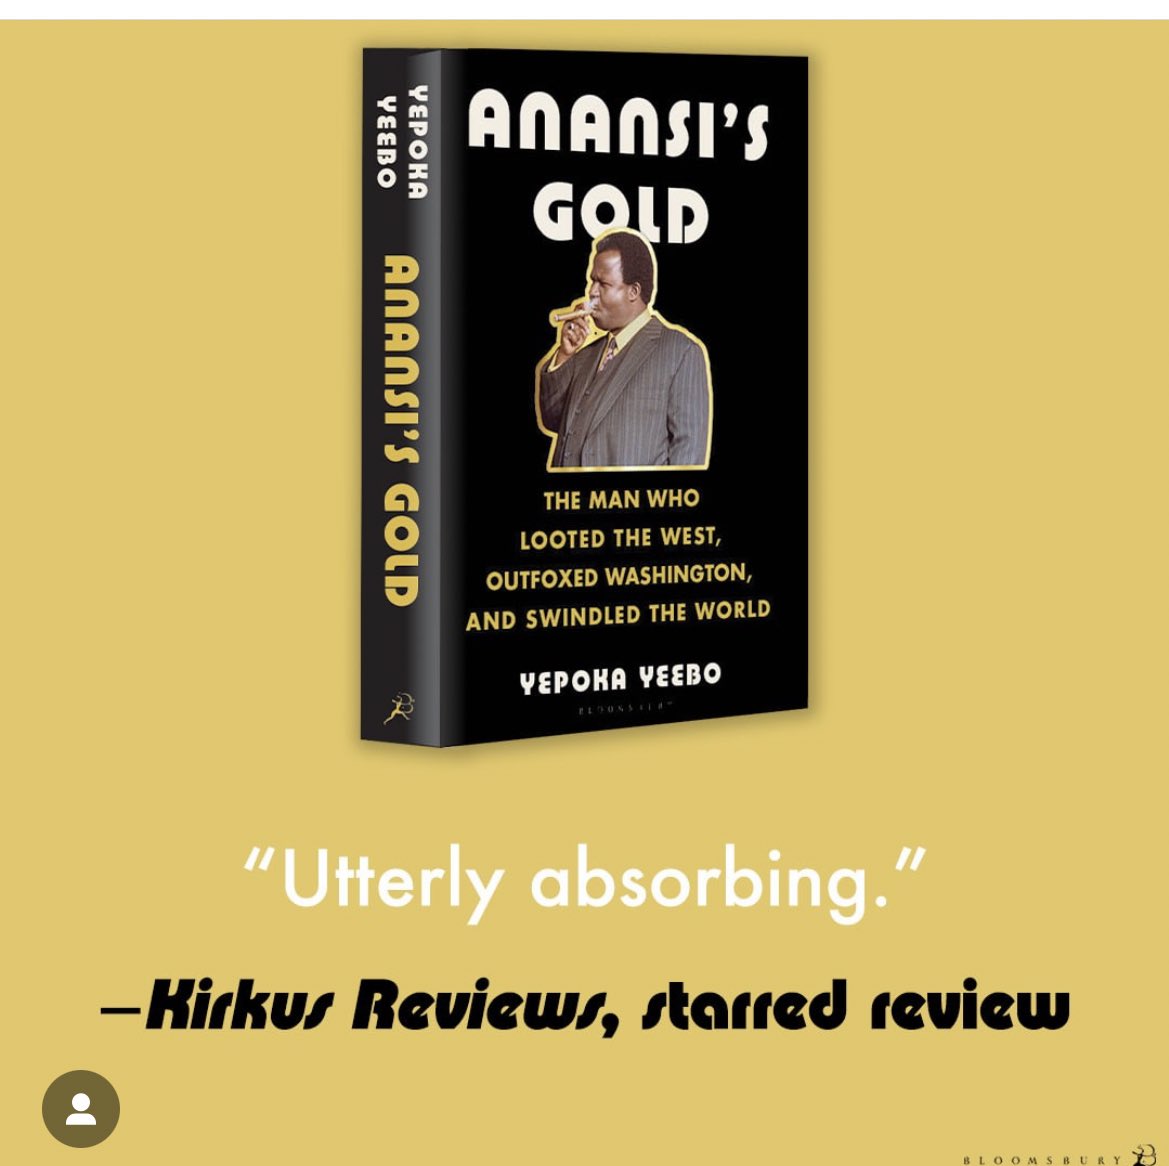 Folks, @yepoka’s highly anticipated book on infamous Ghanaian conman, Ackah Blay-Miezah is now available for preorder. Out in August! bloomsbury.com/us/anansis-gol…